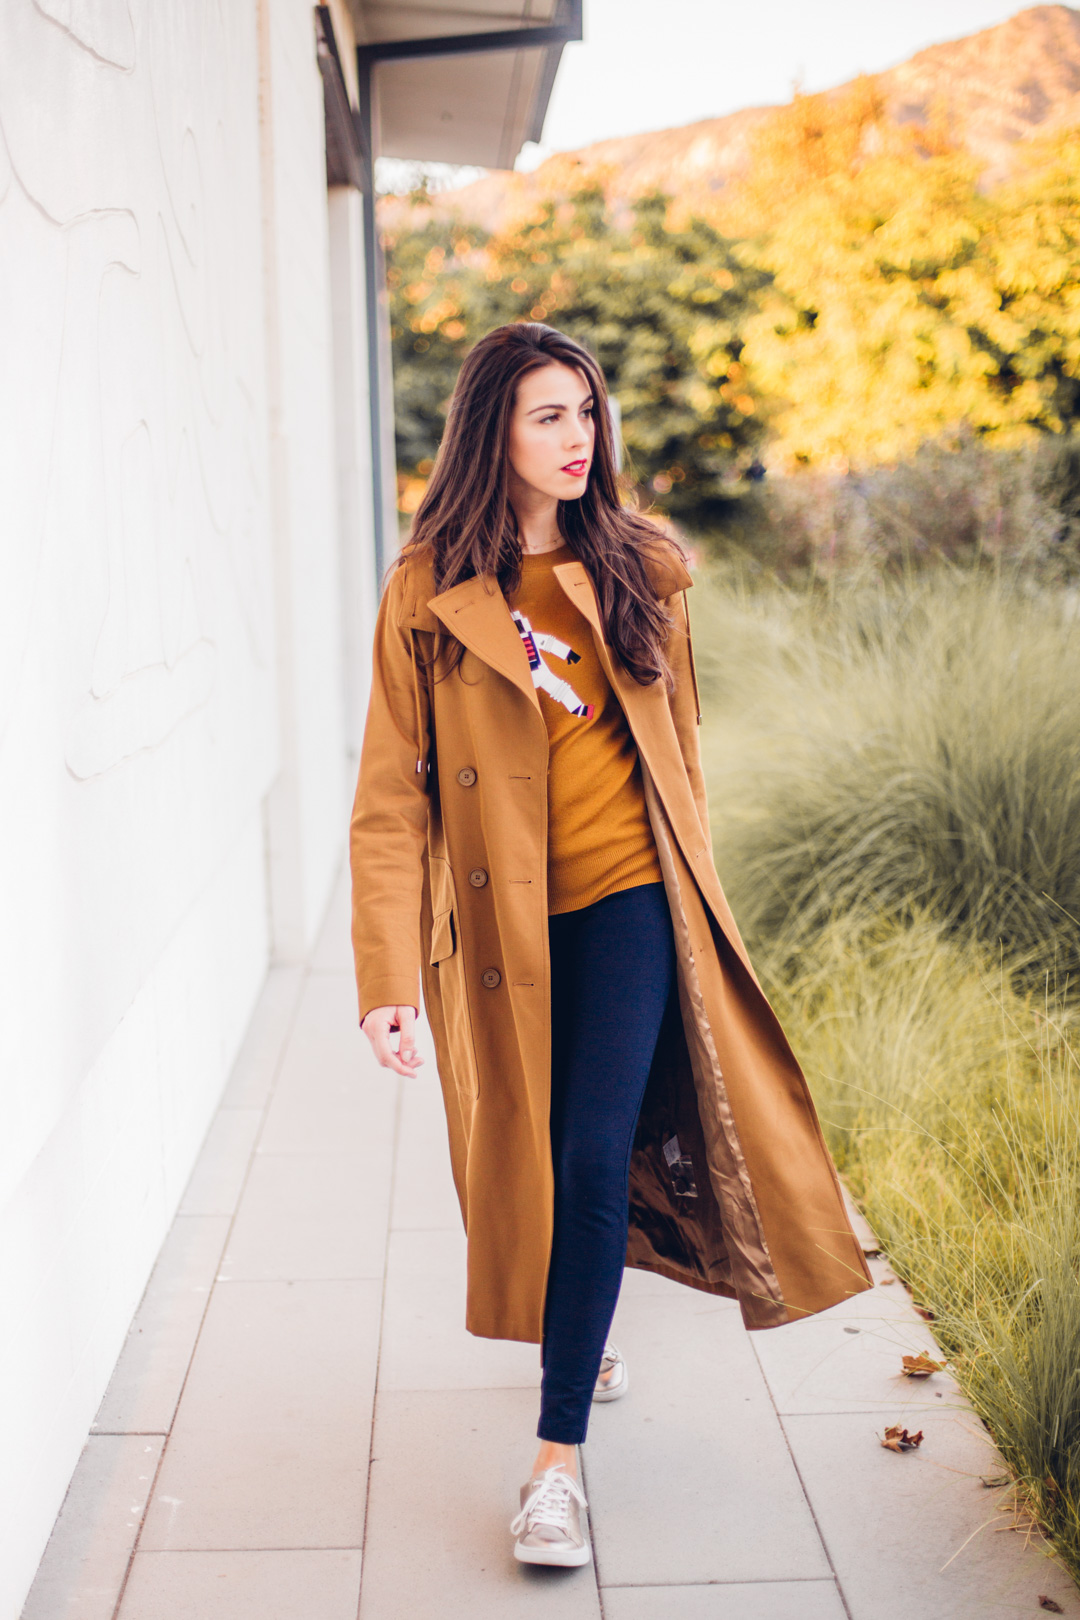 Jackie Roque styling a Lacoste Fall 2017 look with a brown trench coat and astronaut sweater in Malibu.